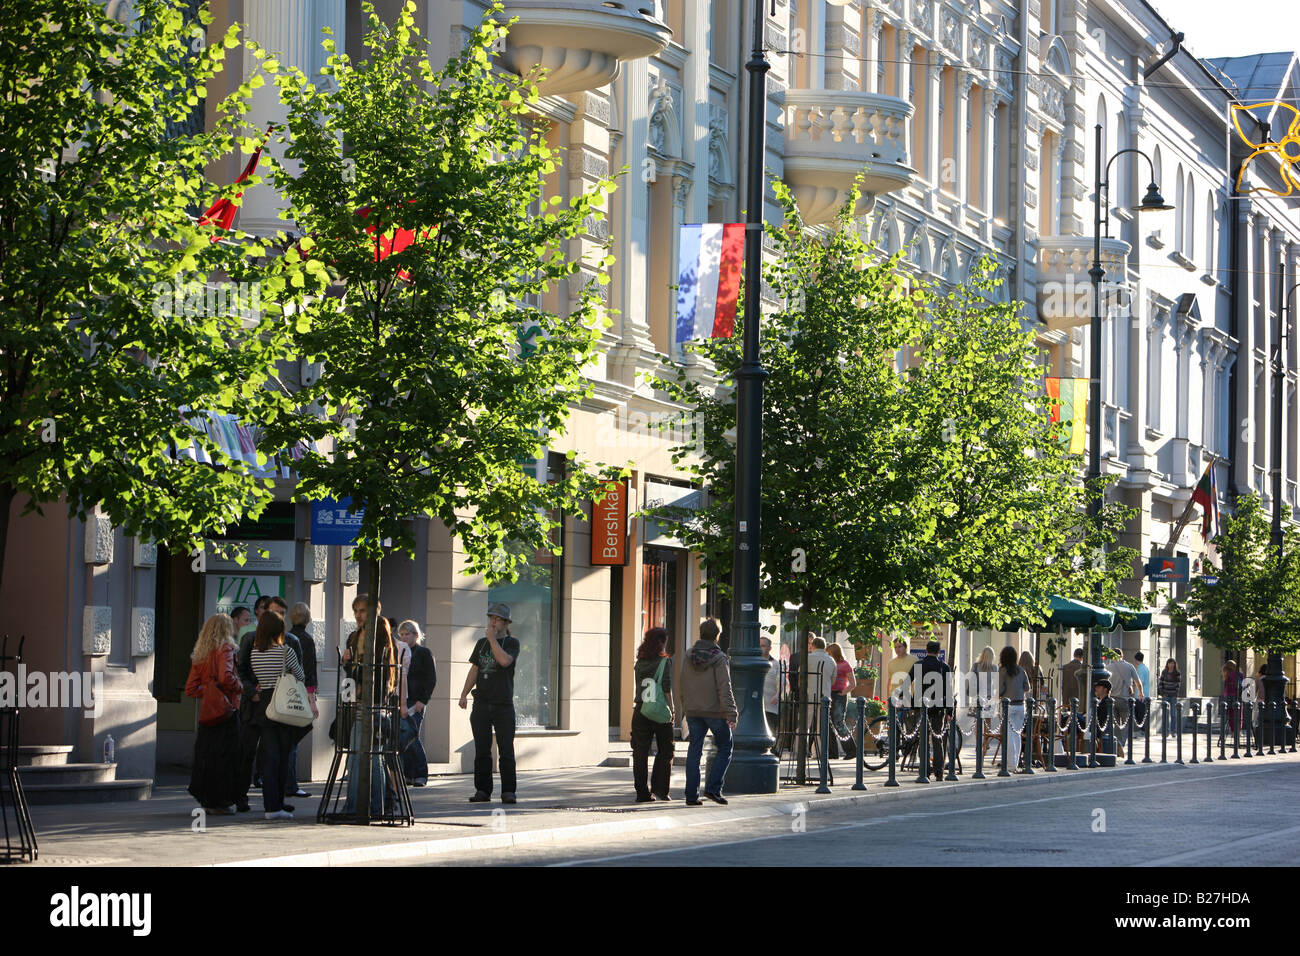 LTU Lithuania Capital Vilnius Gedimino Boulevard shopping street with many shops boutiques restaurants and bar Stock Photo